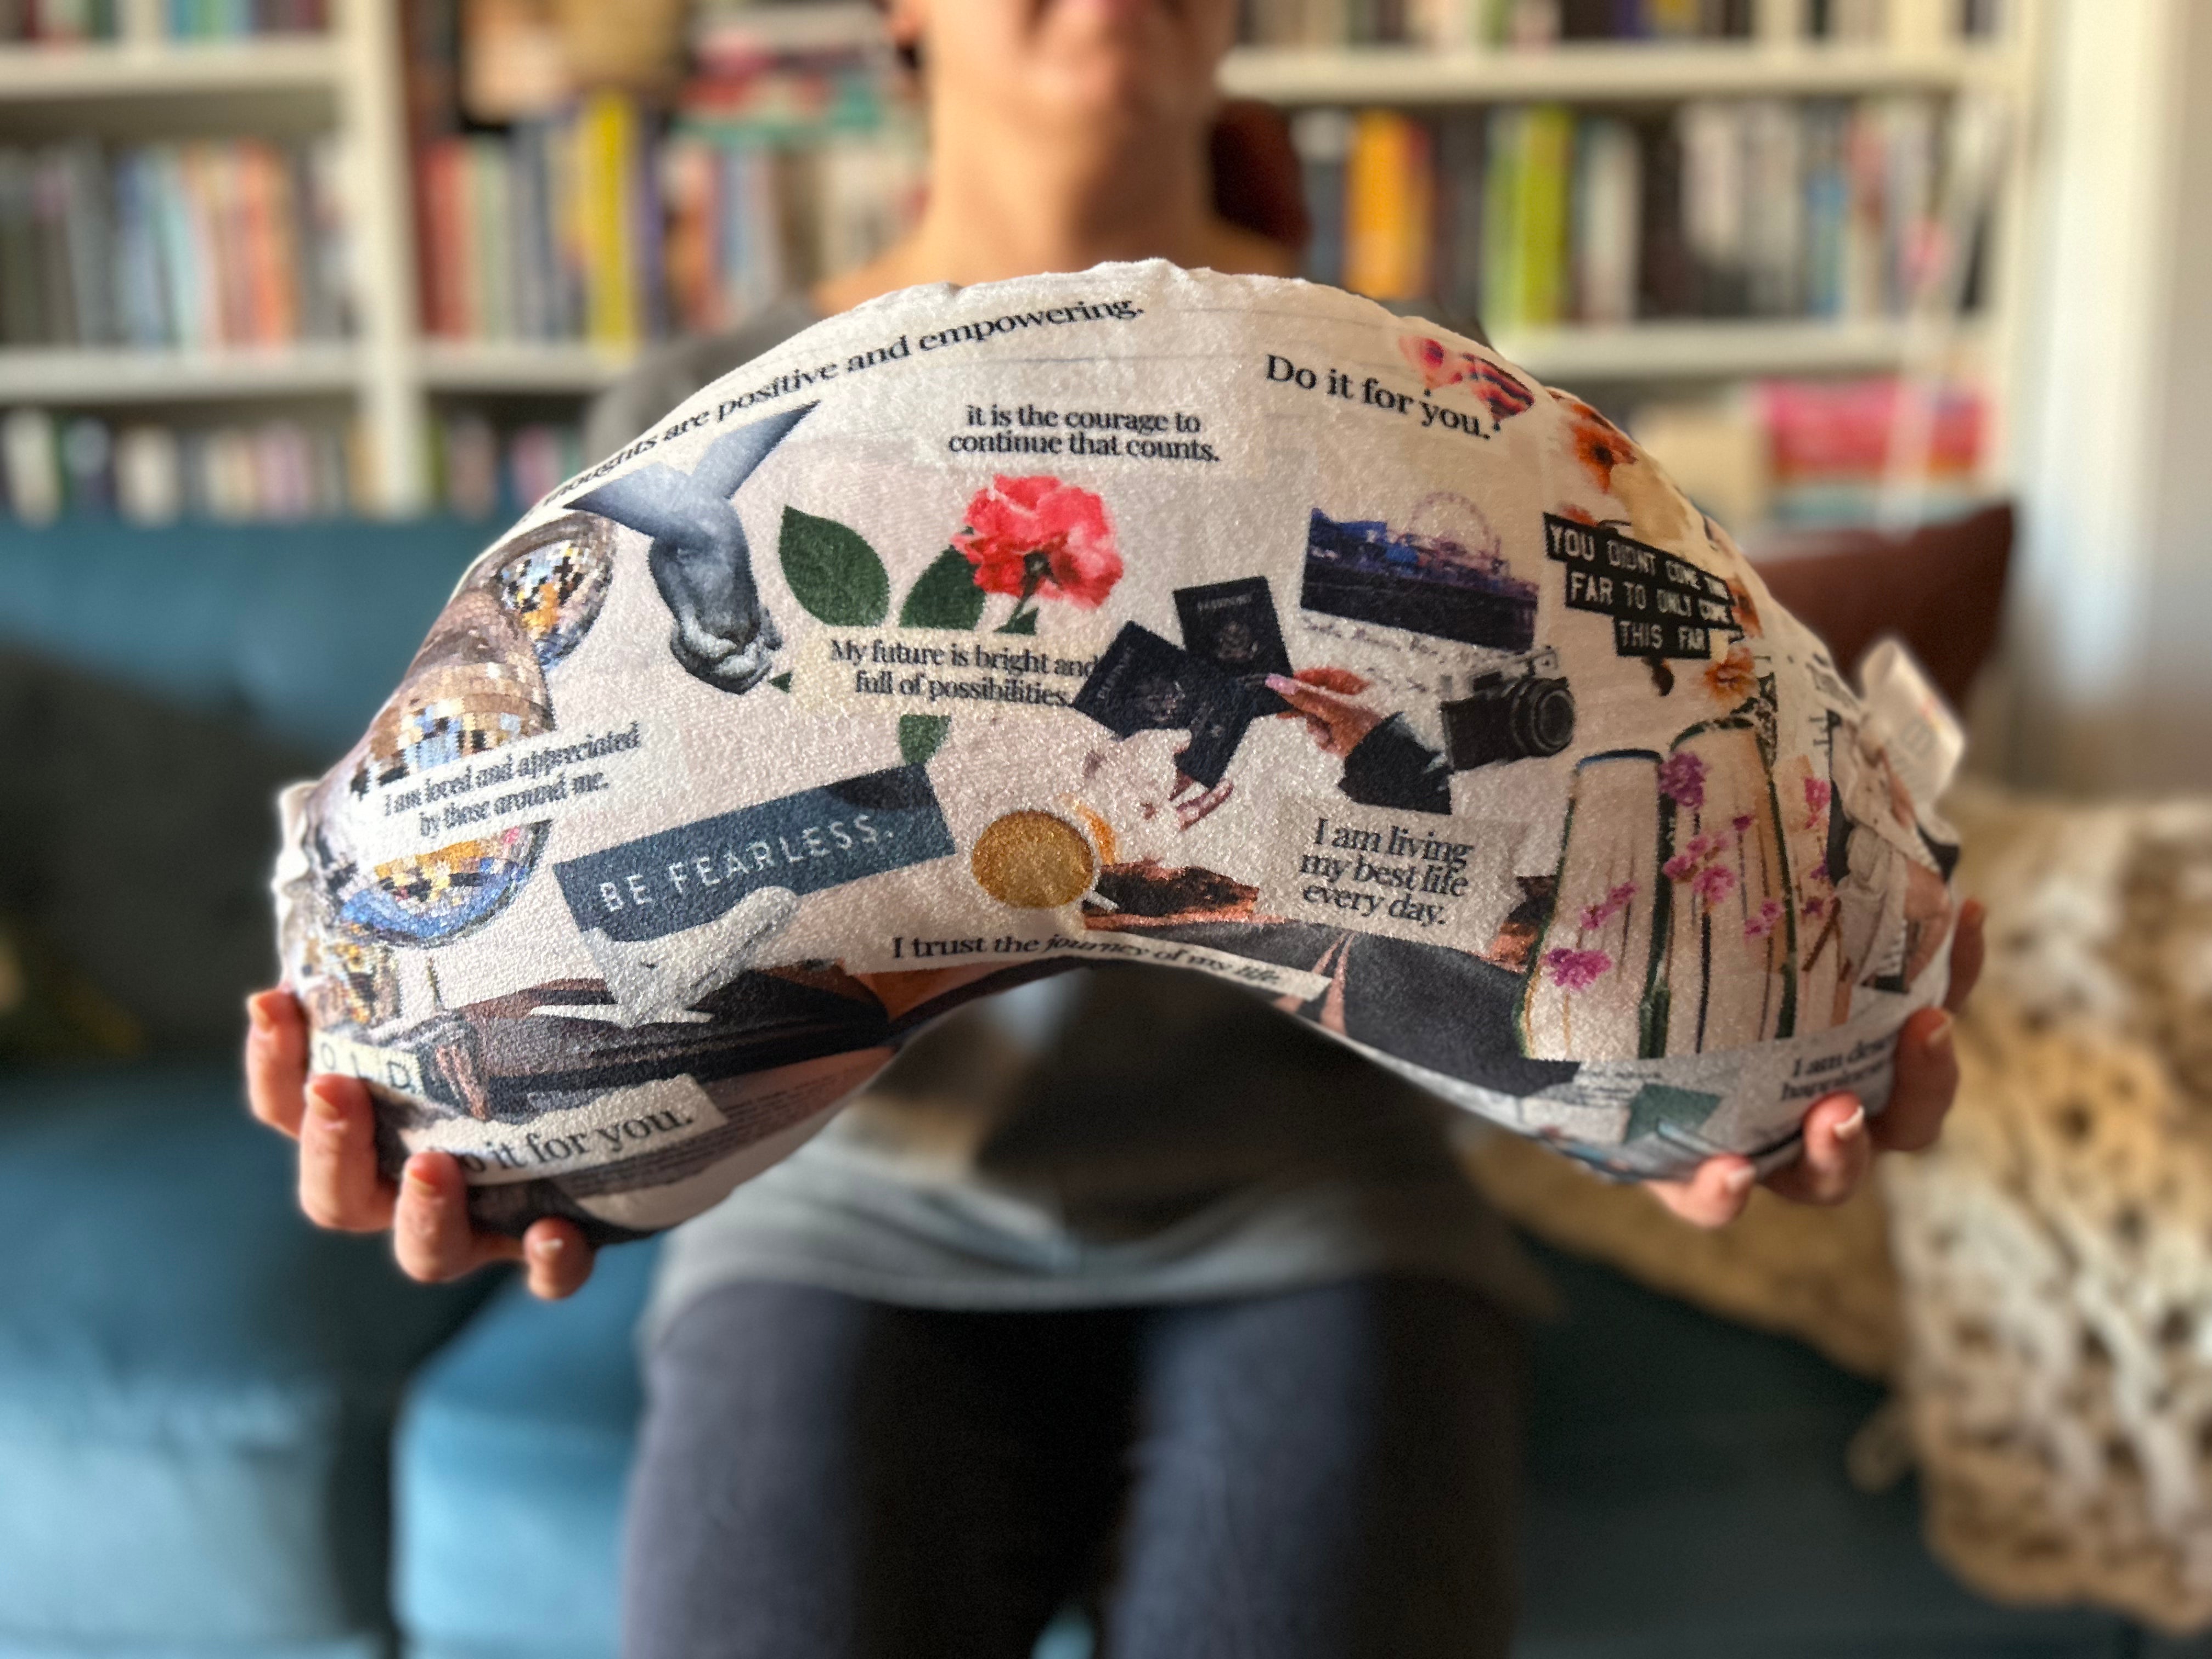 REPLACEMENT COVER ONLY Vision Board (Flat Minky) | Reading Pillow